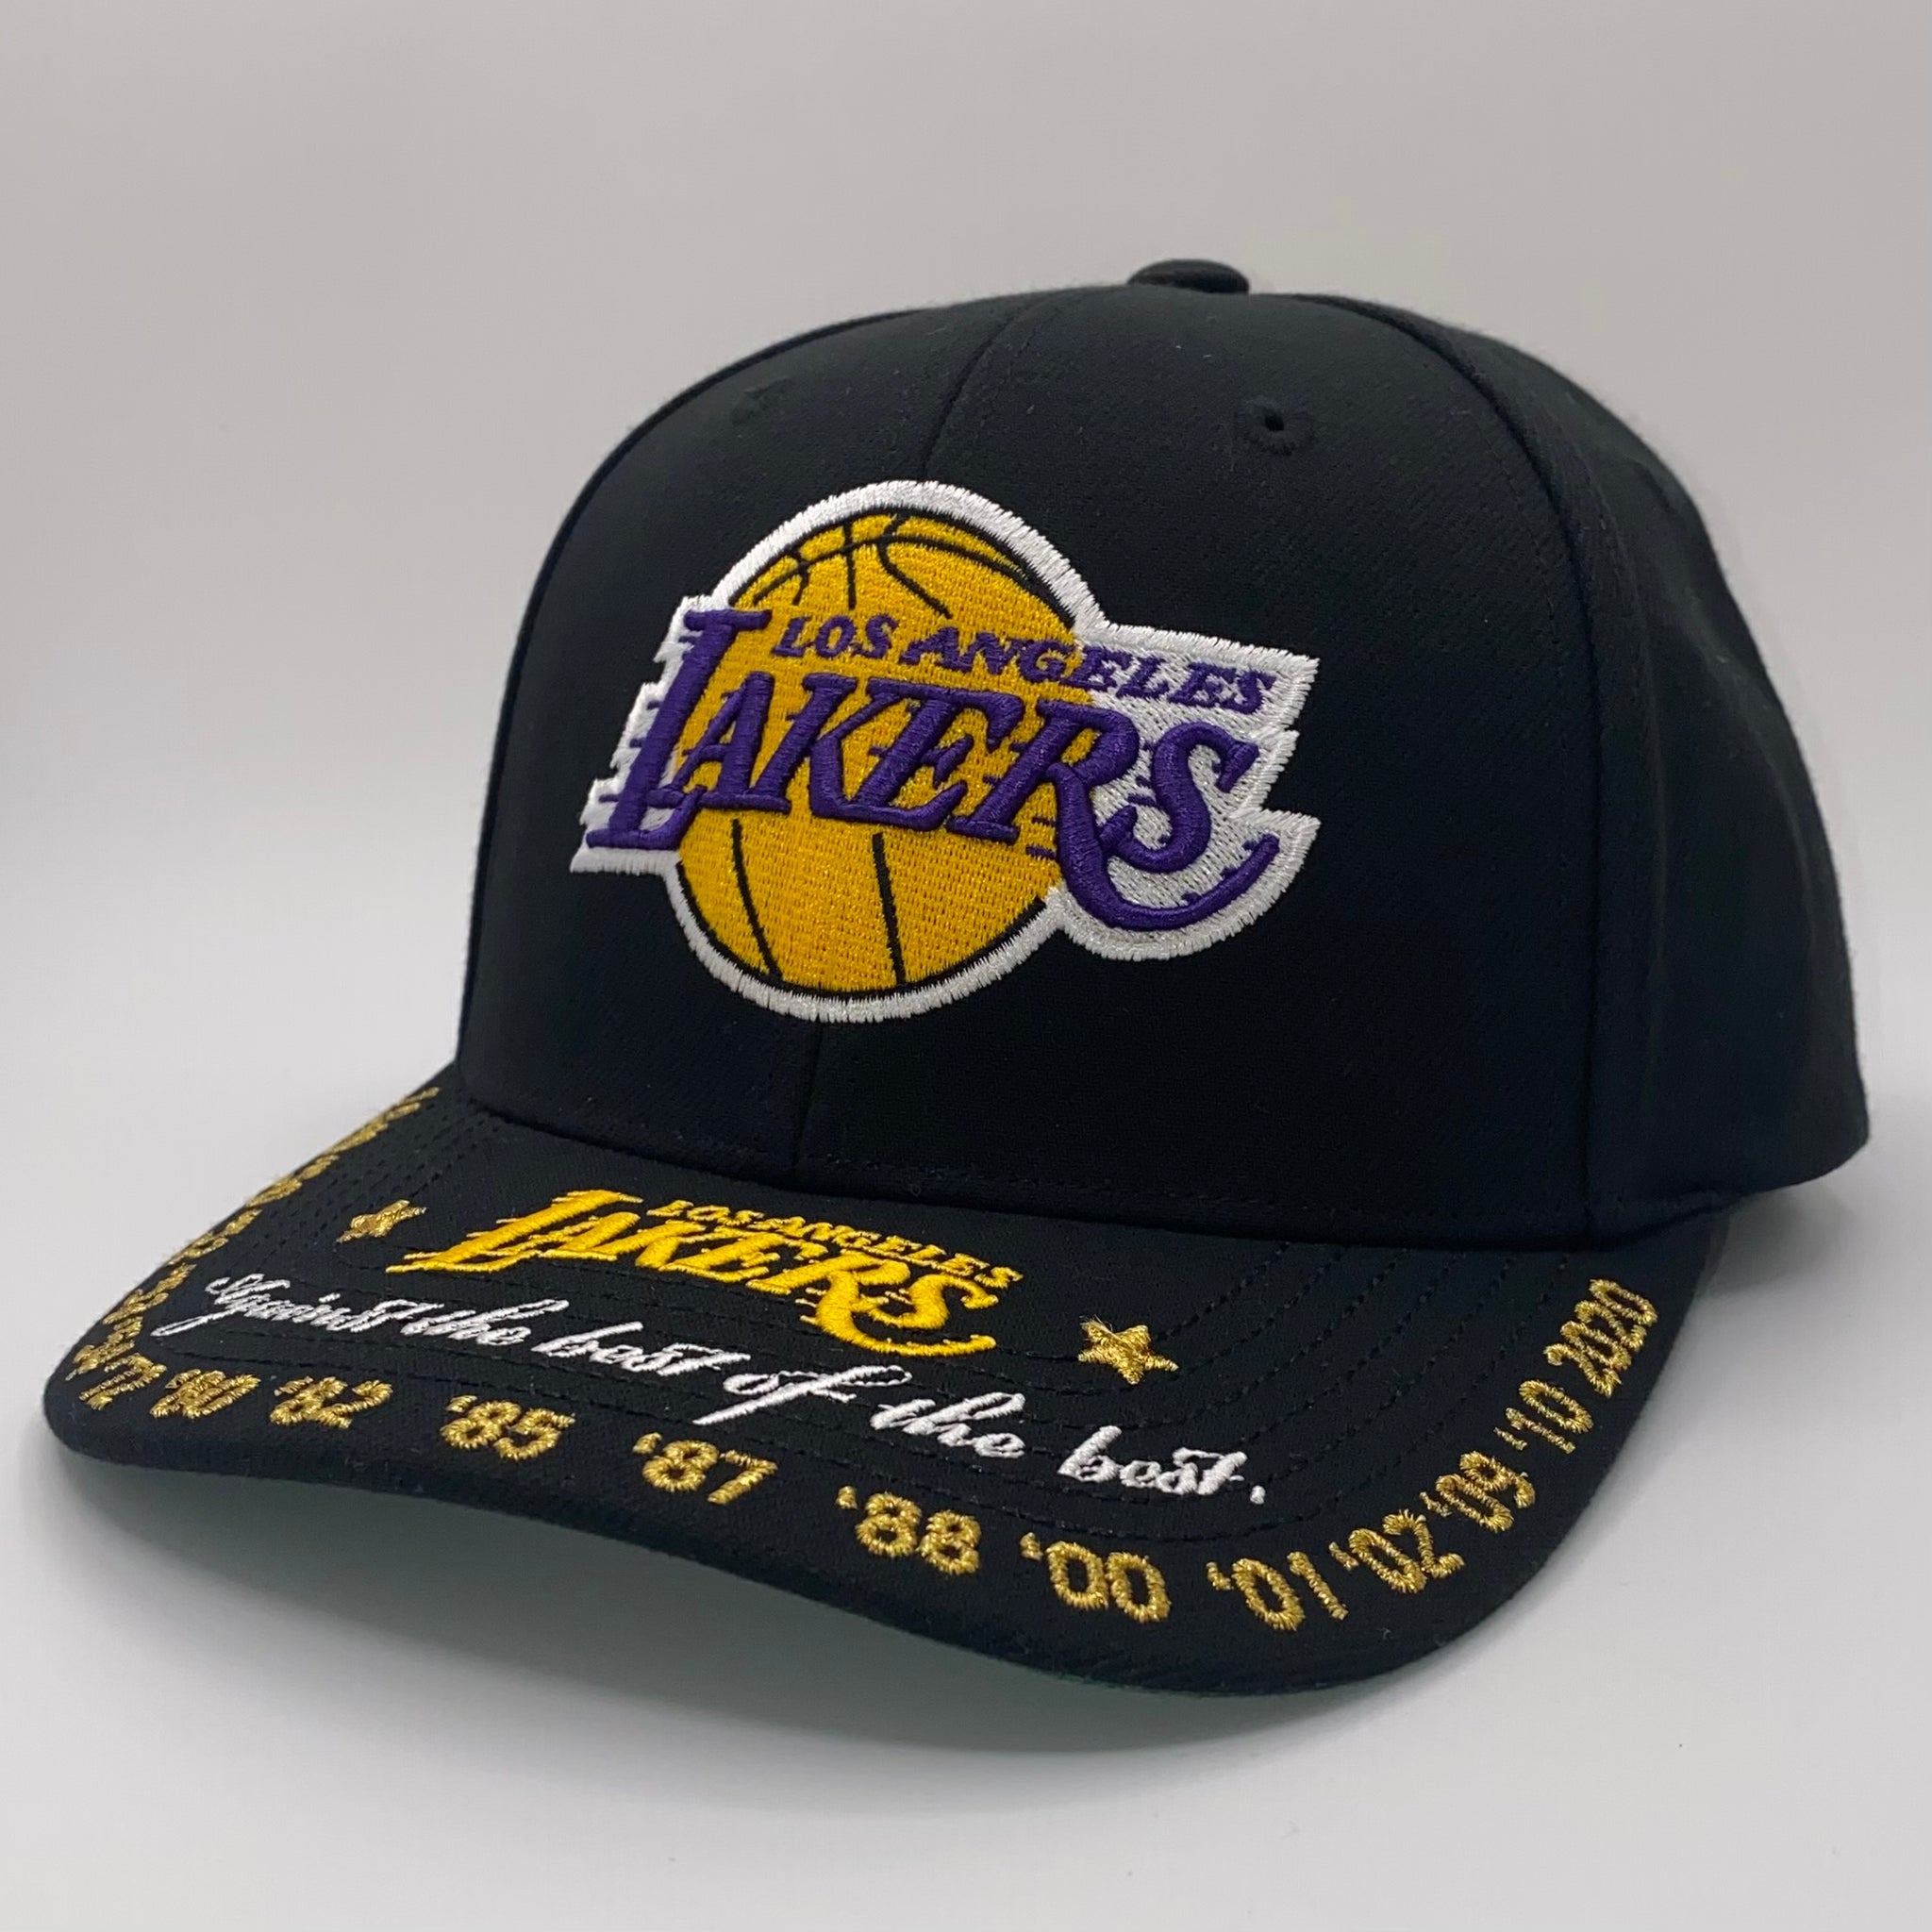 Los Angeles Lakers "Against the Best of the Best" Snapback Hat